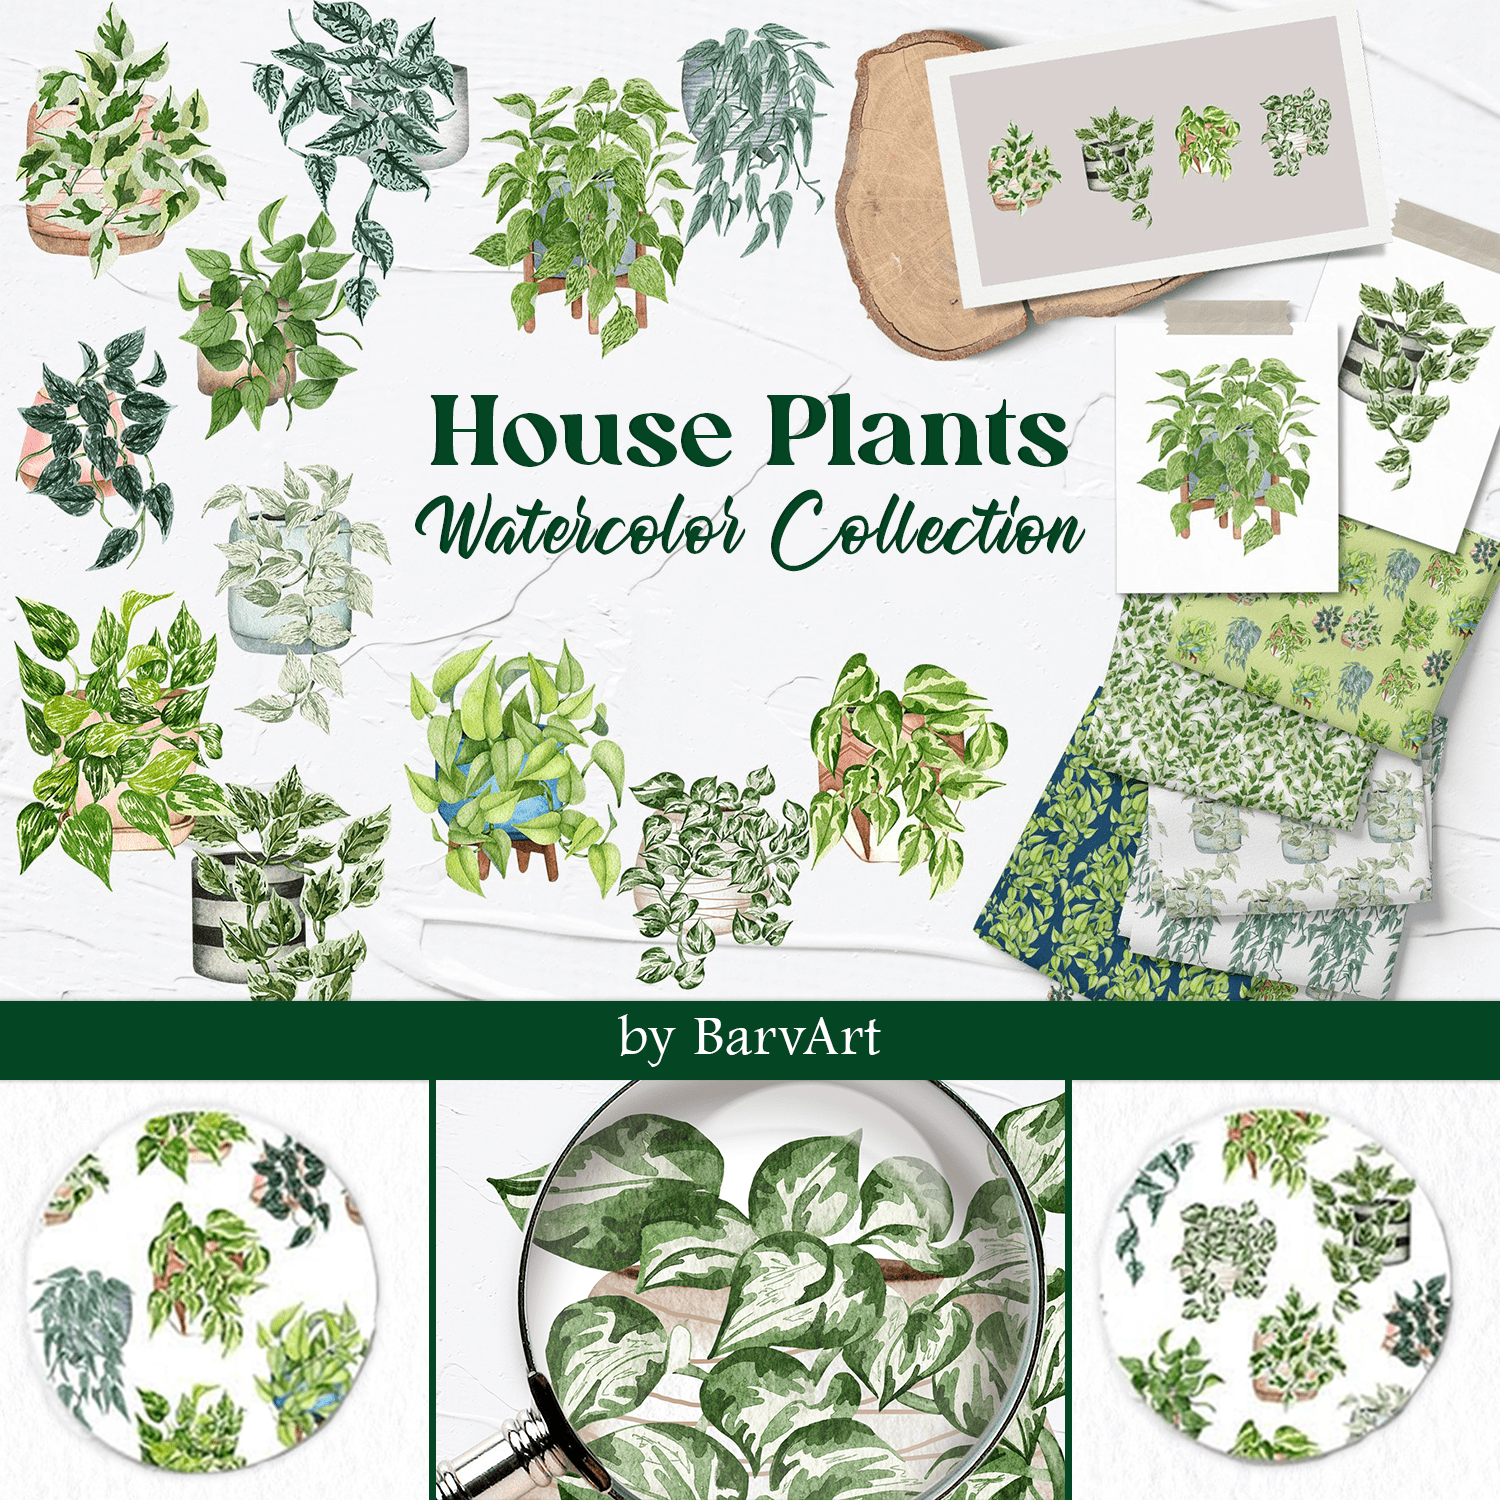 House Plants Watercolor Collection cover.